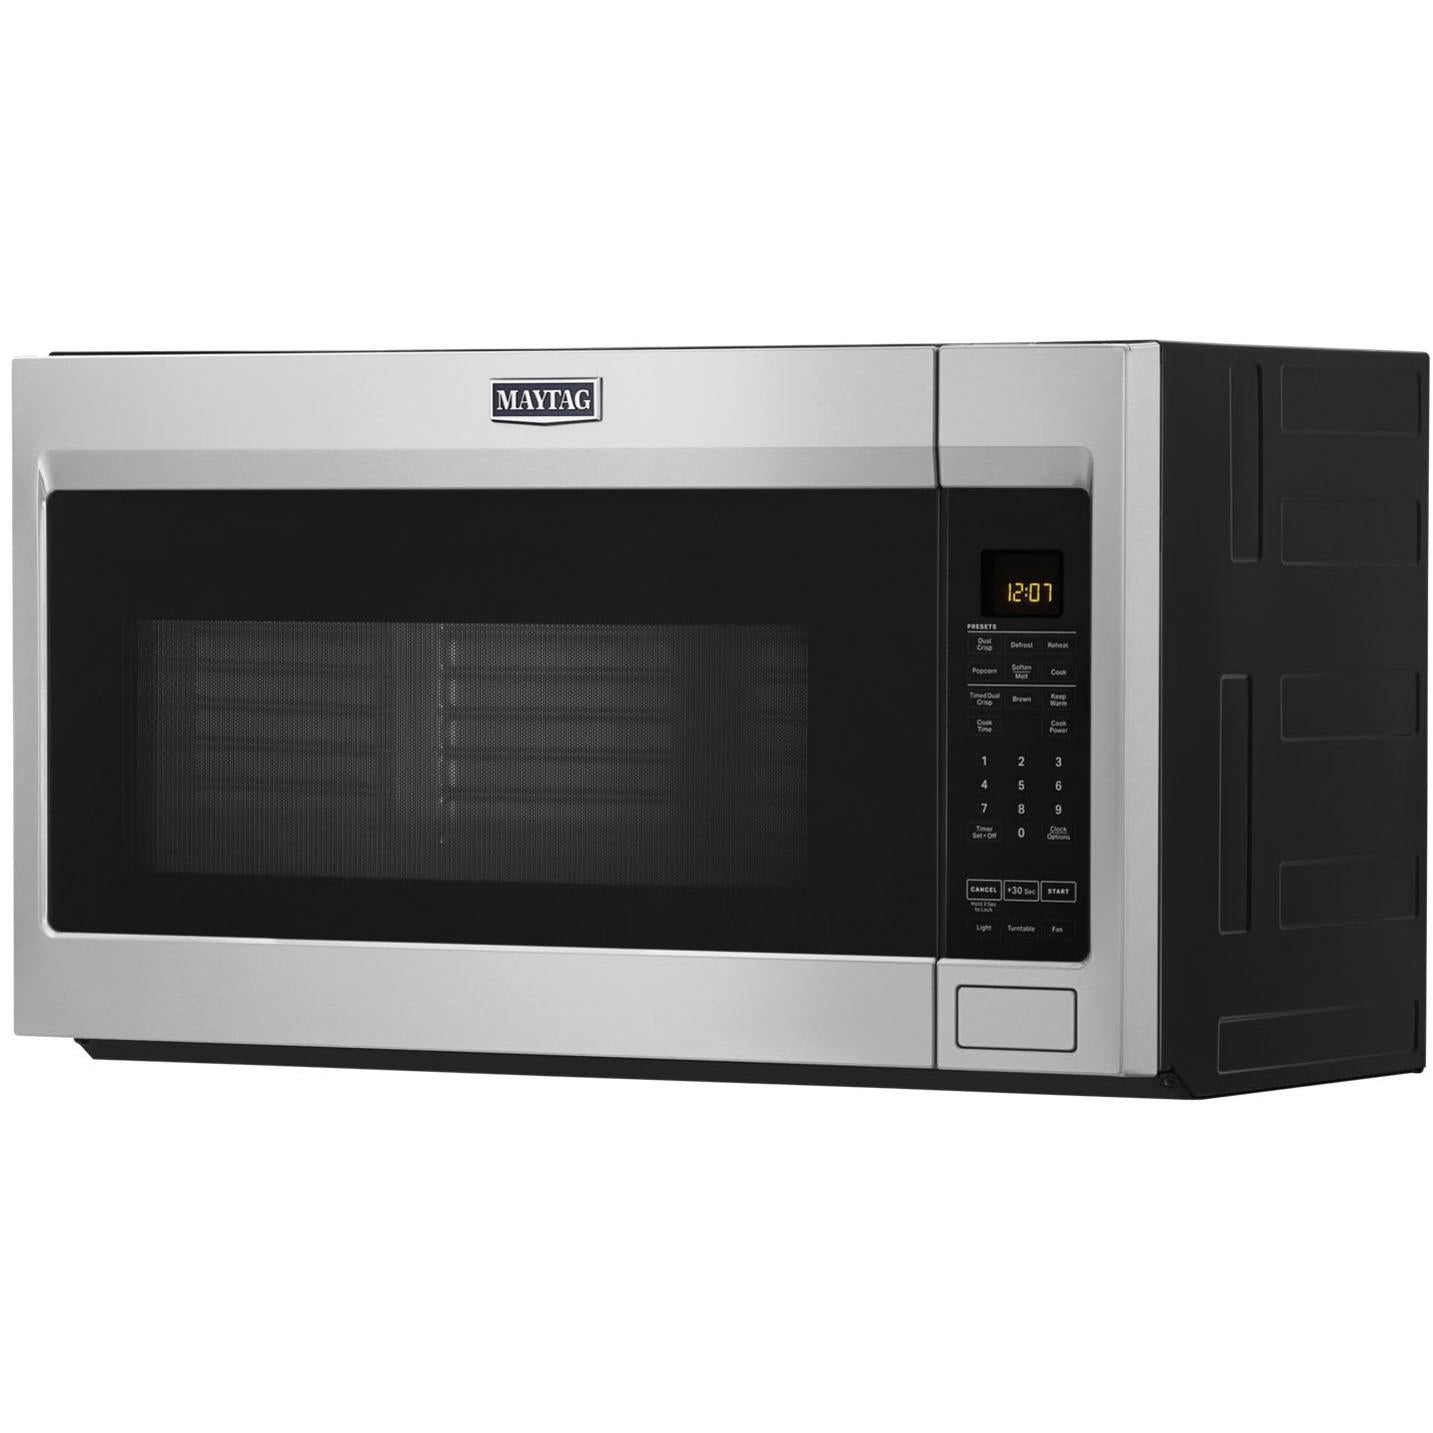 Maytag 30-inch, 1.9 cu.ft. Over-the-Range Microwave Oven with Stainless Steel Interior MMV4207JZ